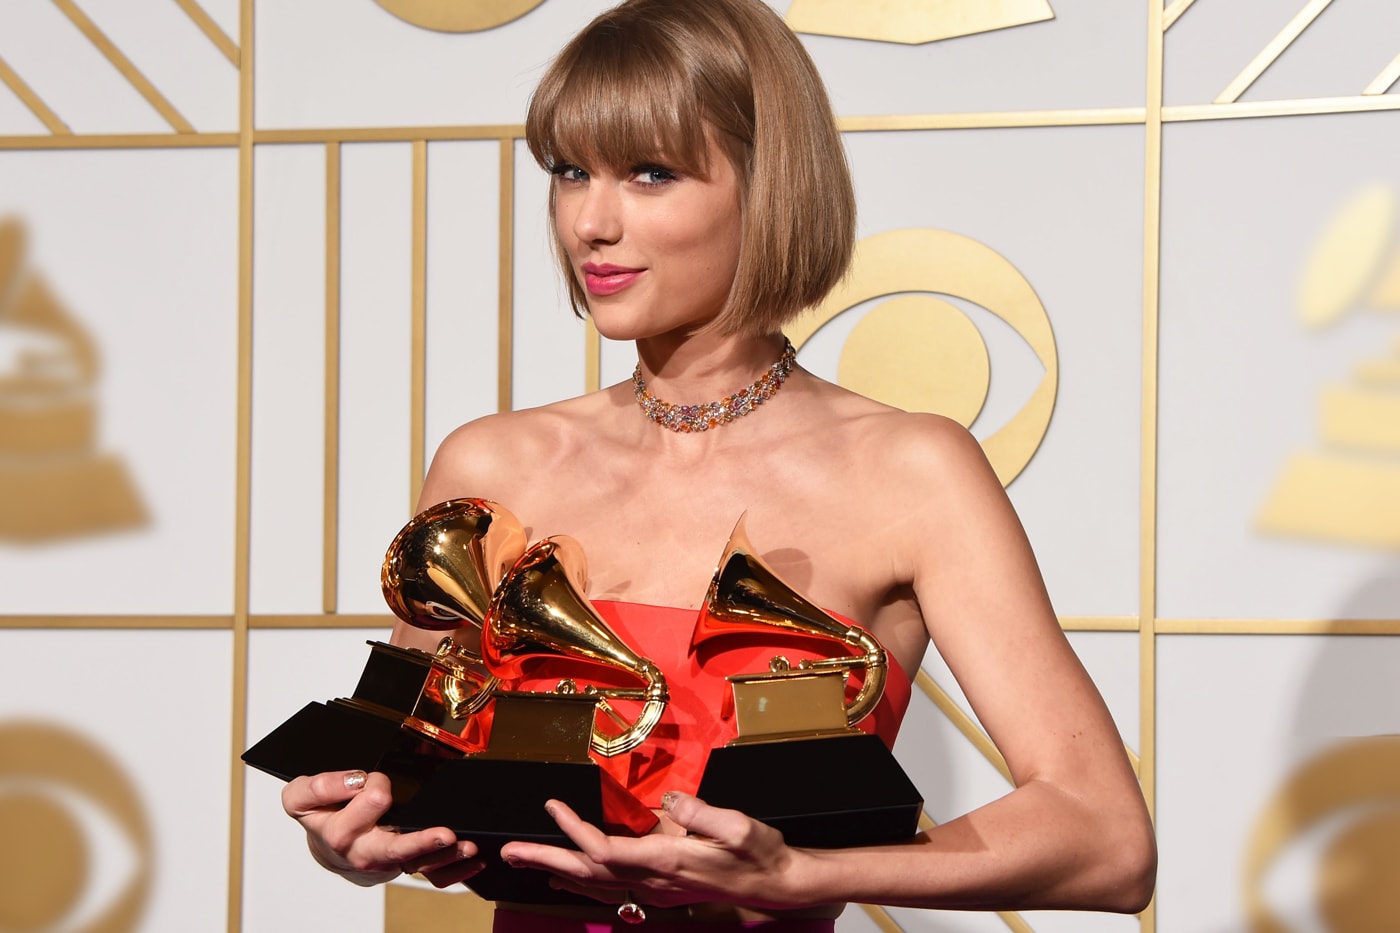 Why Were the GRAMMY Rating & Viewership Lowest in Years?